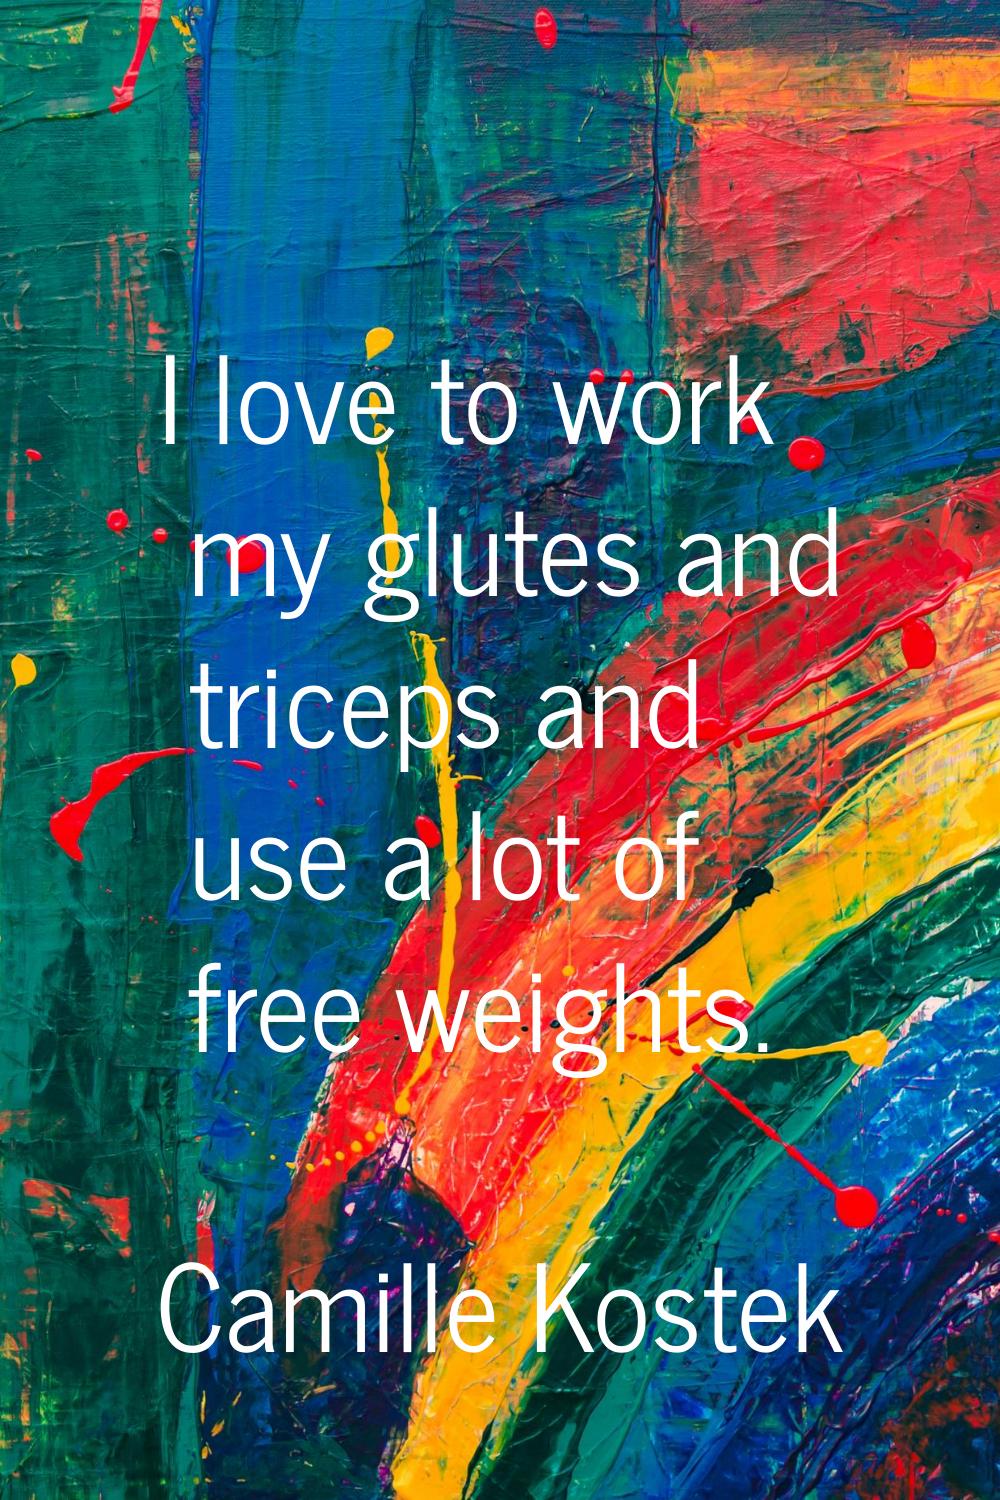 I love to work my glutes and triceps and use a lot of free weights.